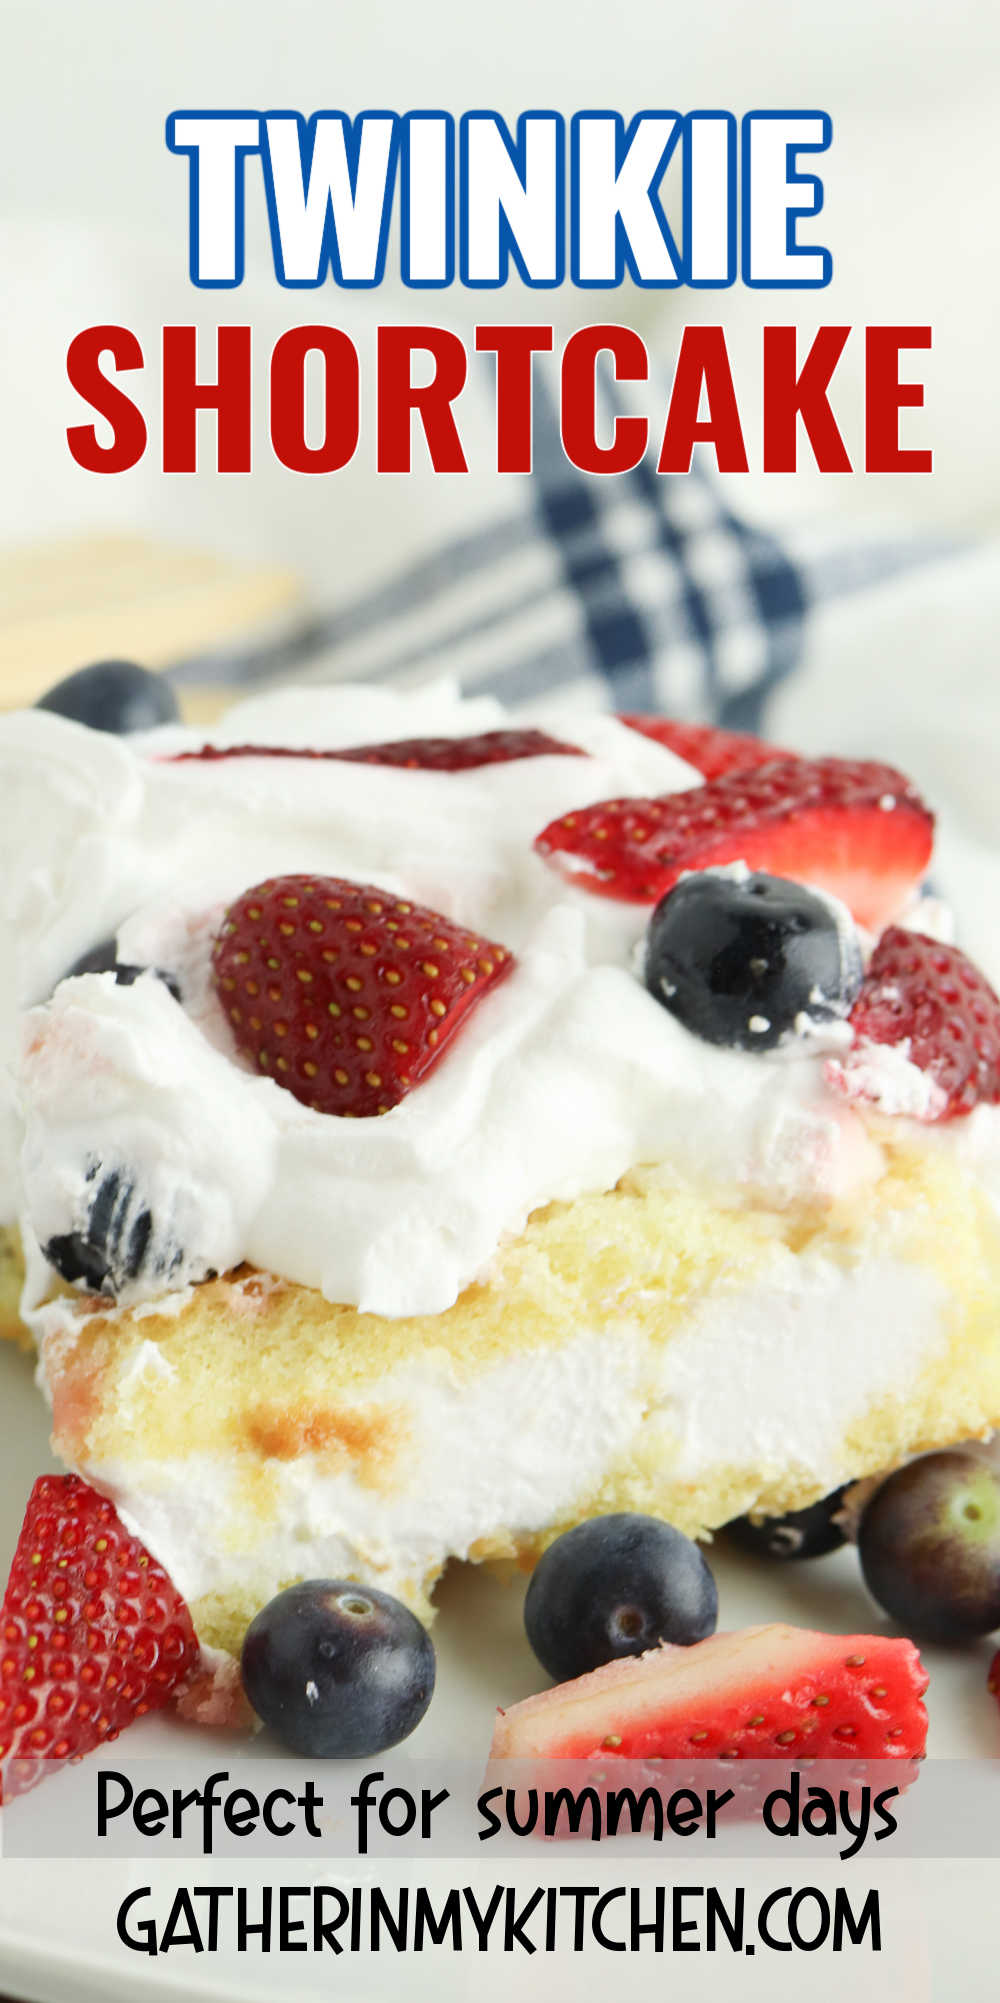 Pin image: top says "Twinkie Shortcake" and bottom has a slice of twinkie berry shortcake.